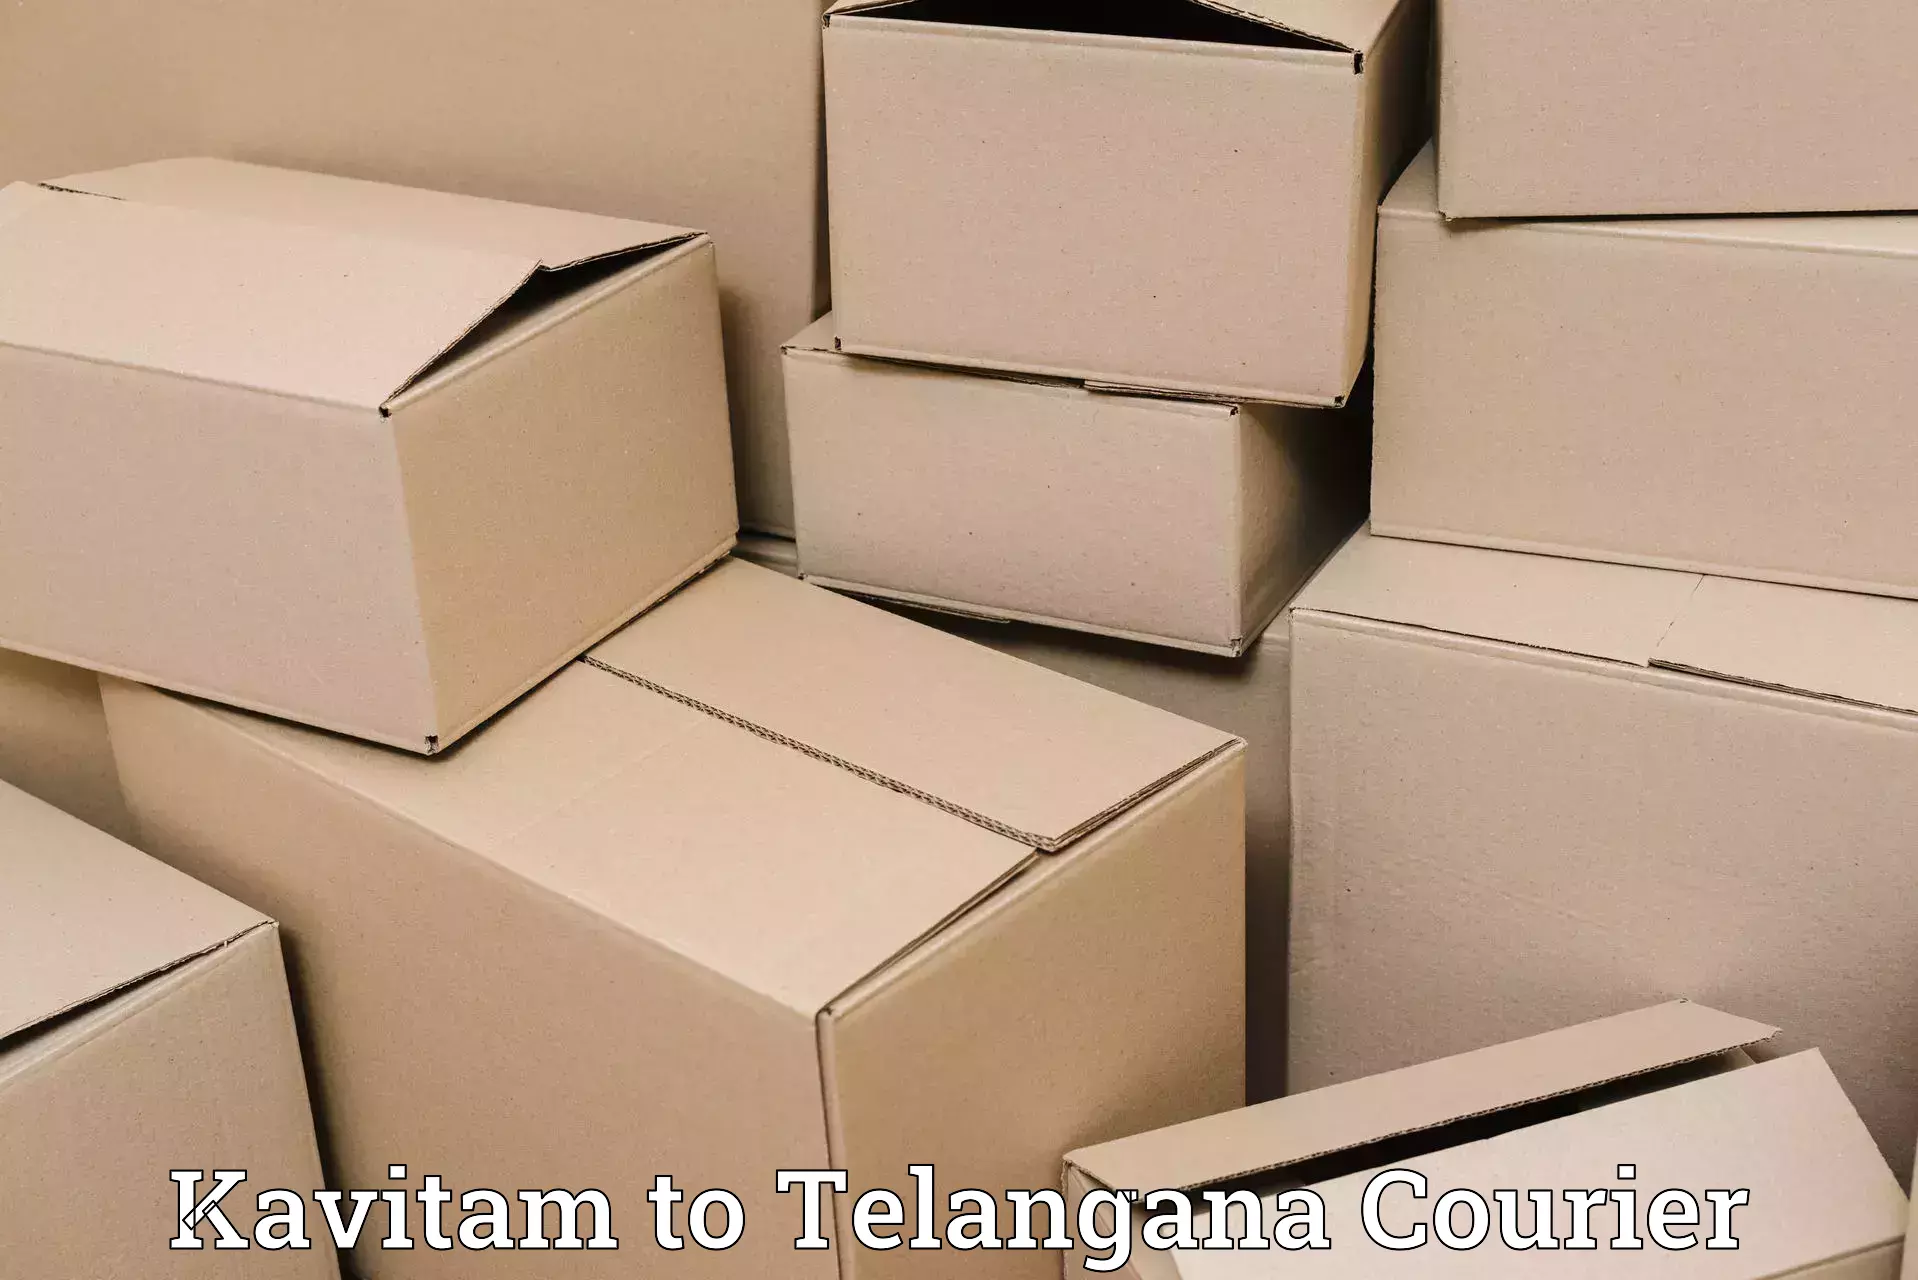 Courier service comparison in Kavitam to Madgulapally